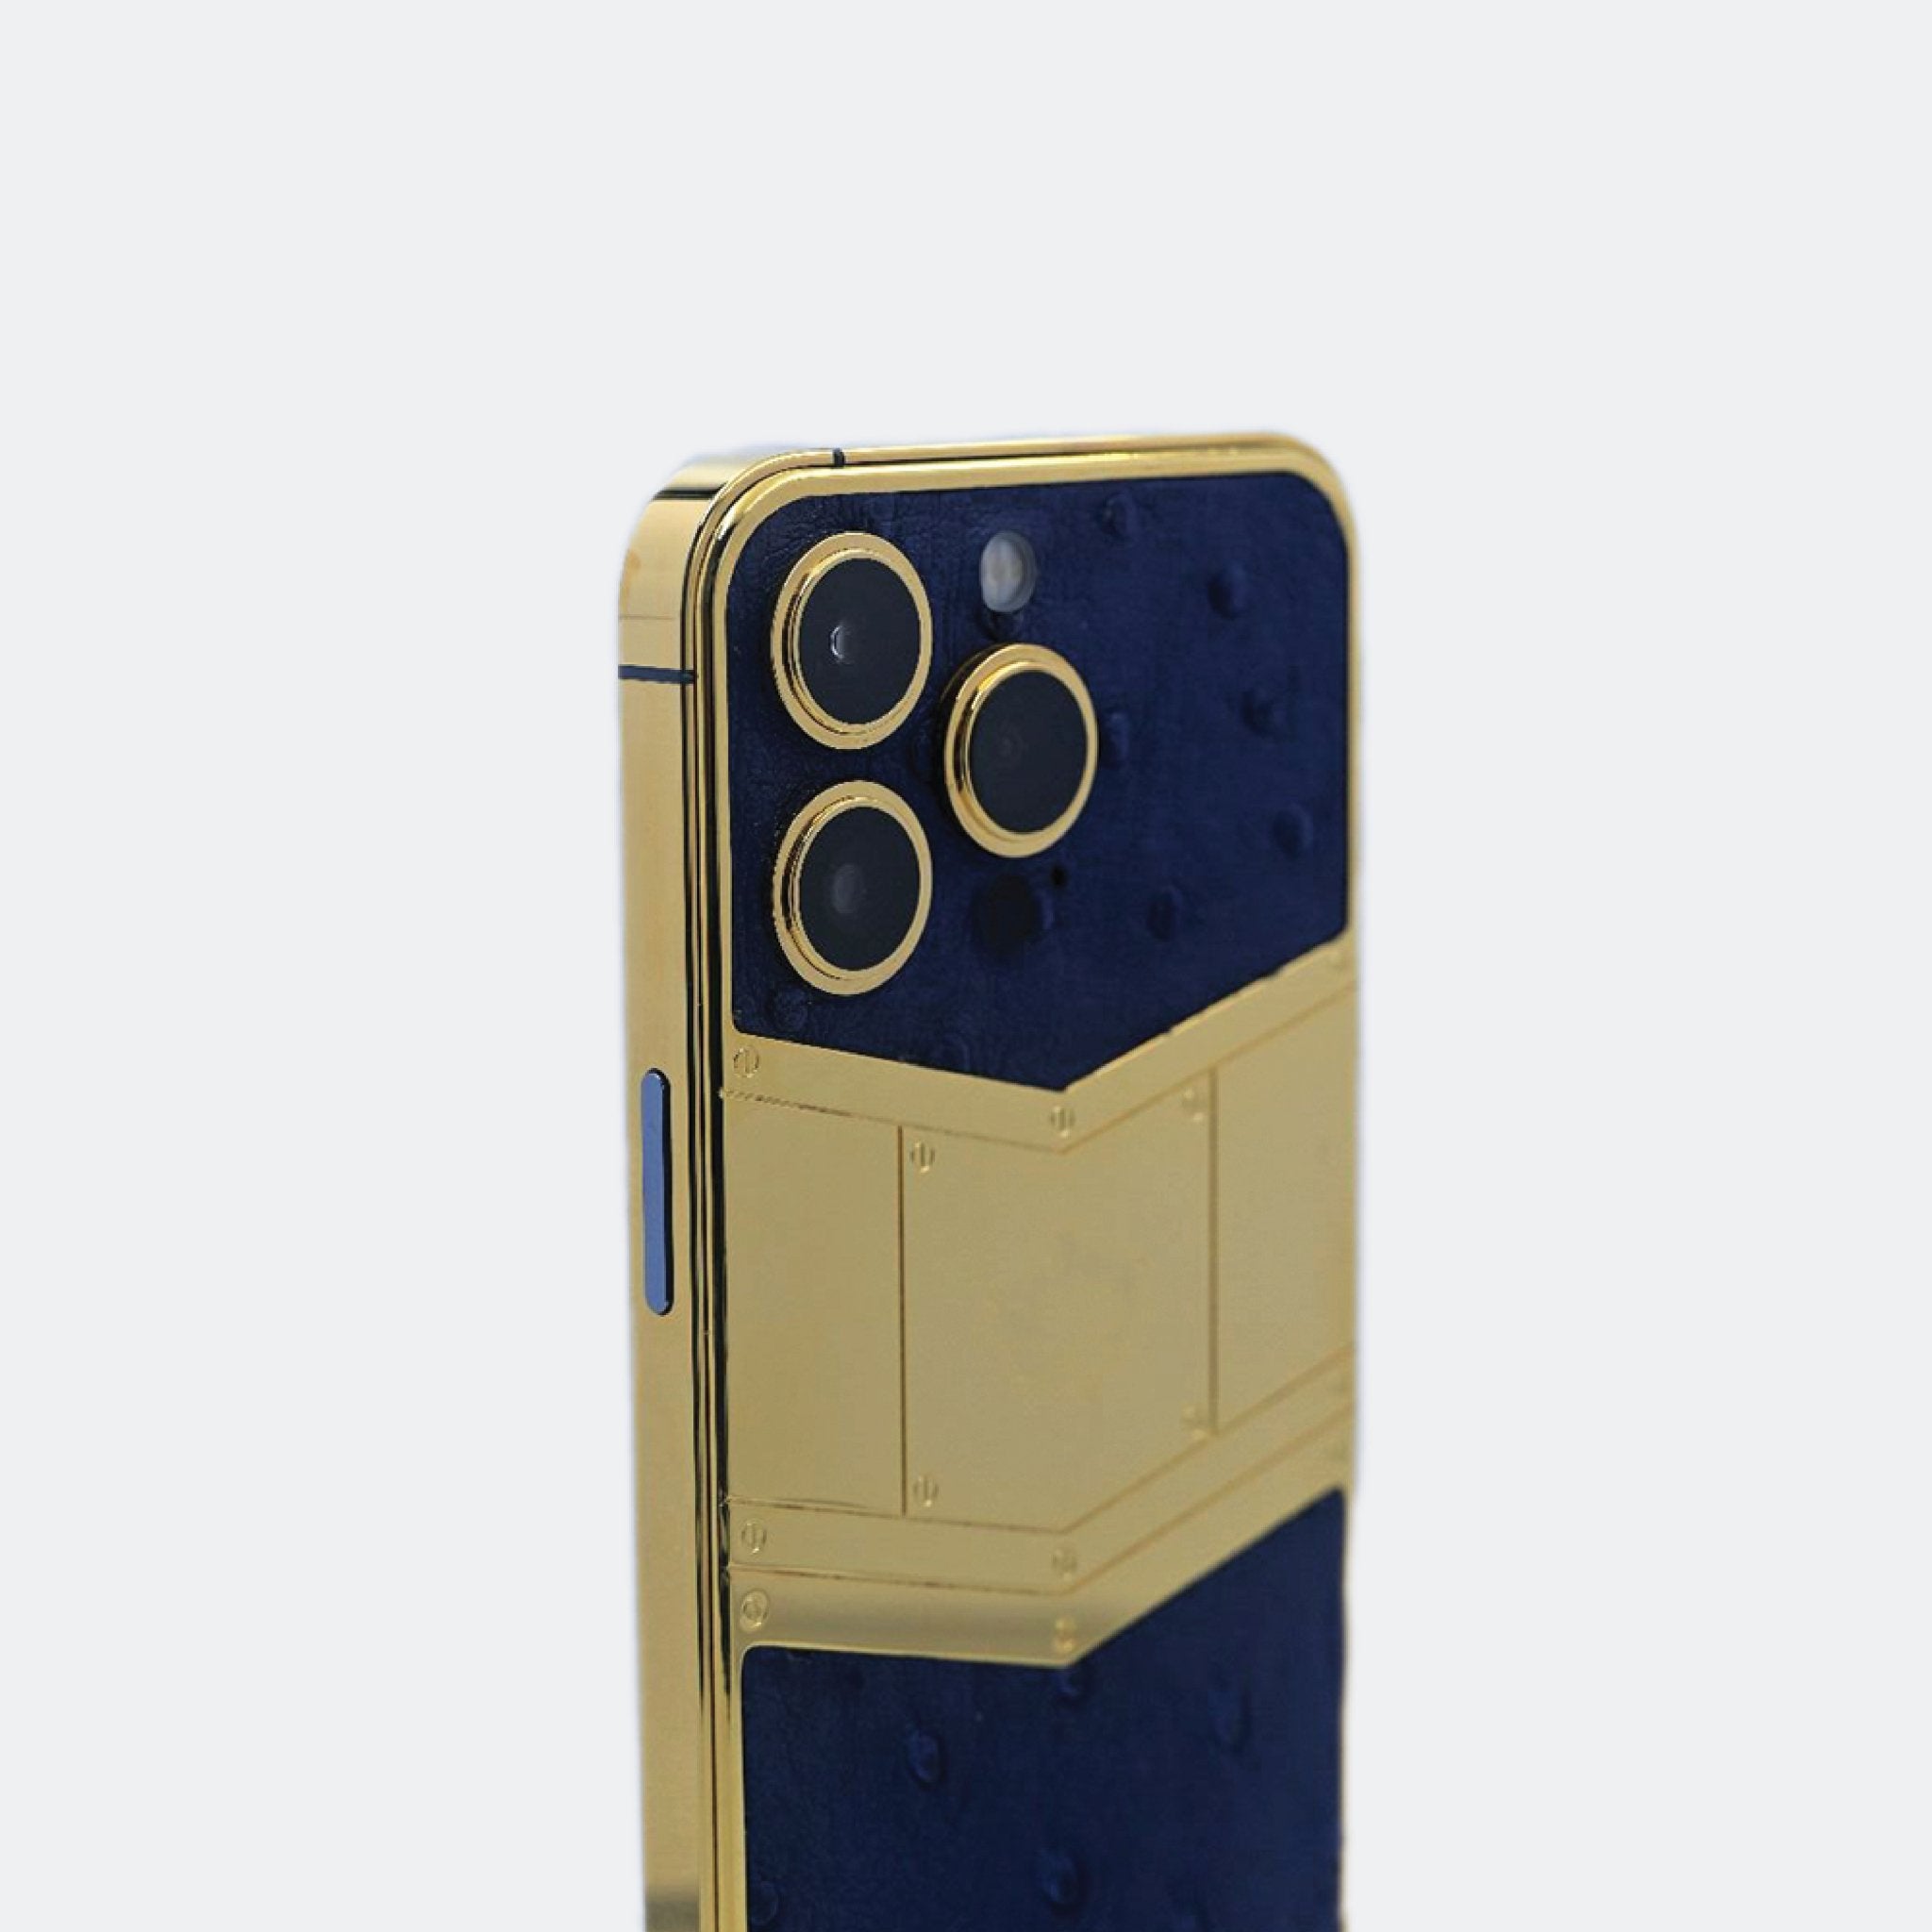 Luxury Bee Grace IPhone -24K Gold Plated IPhone with Premium Ostrich Leather,Luxury Phone - Luxury Bee